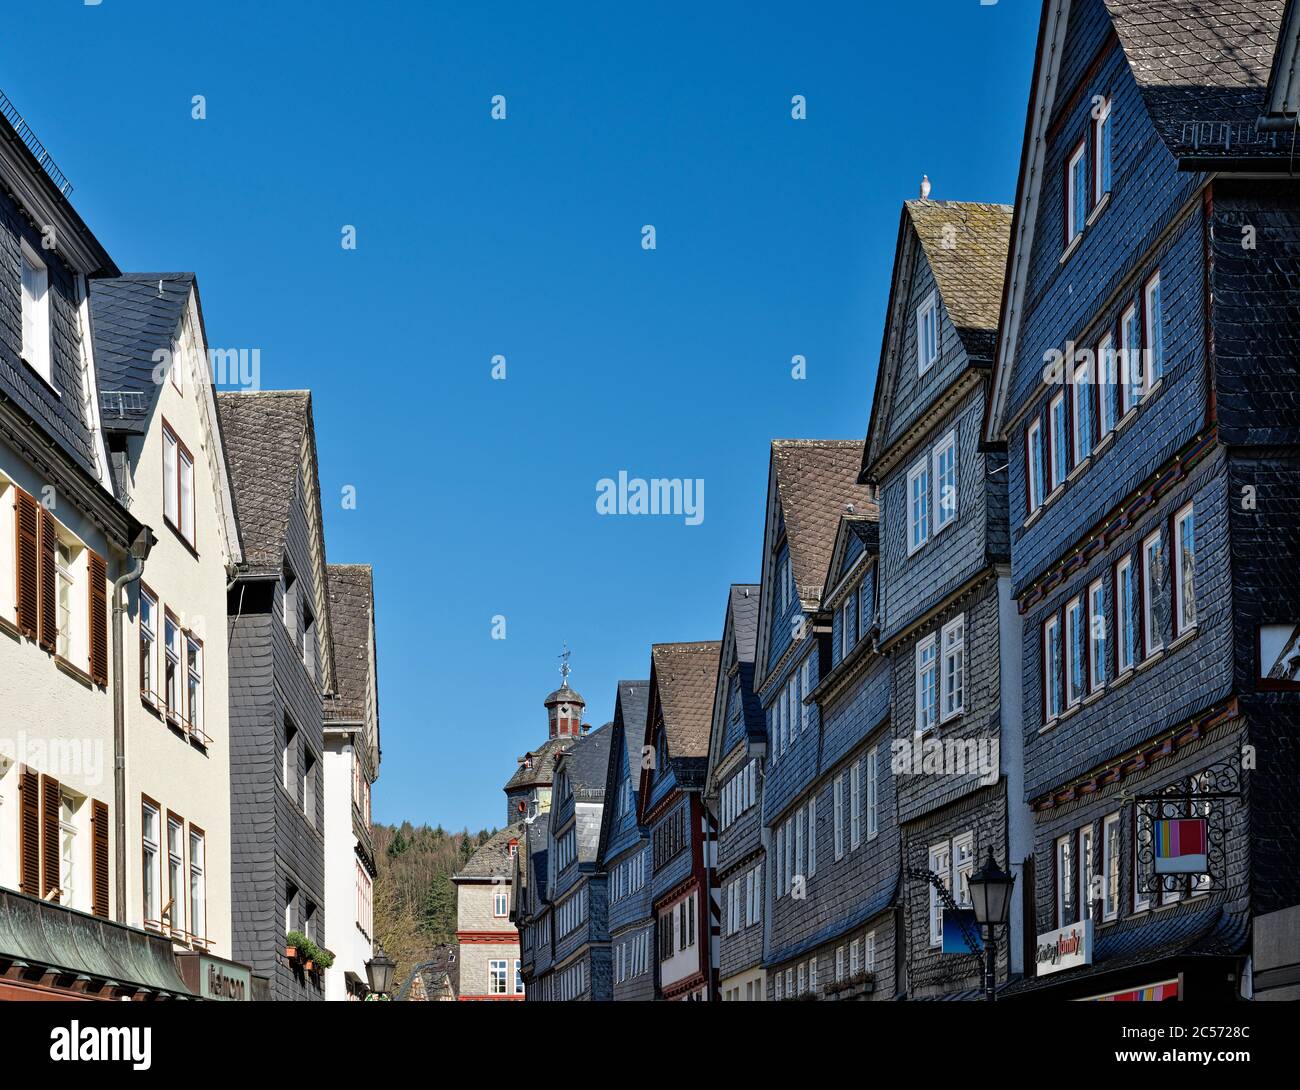 Europe, Germany, Hesse, Lahn-Dill-Bergland Nature Park, city of Herborn, slated houses in the main street, view to the market square with the town hal Stock Photo